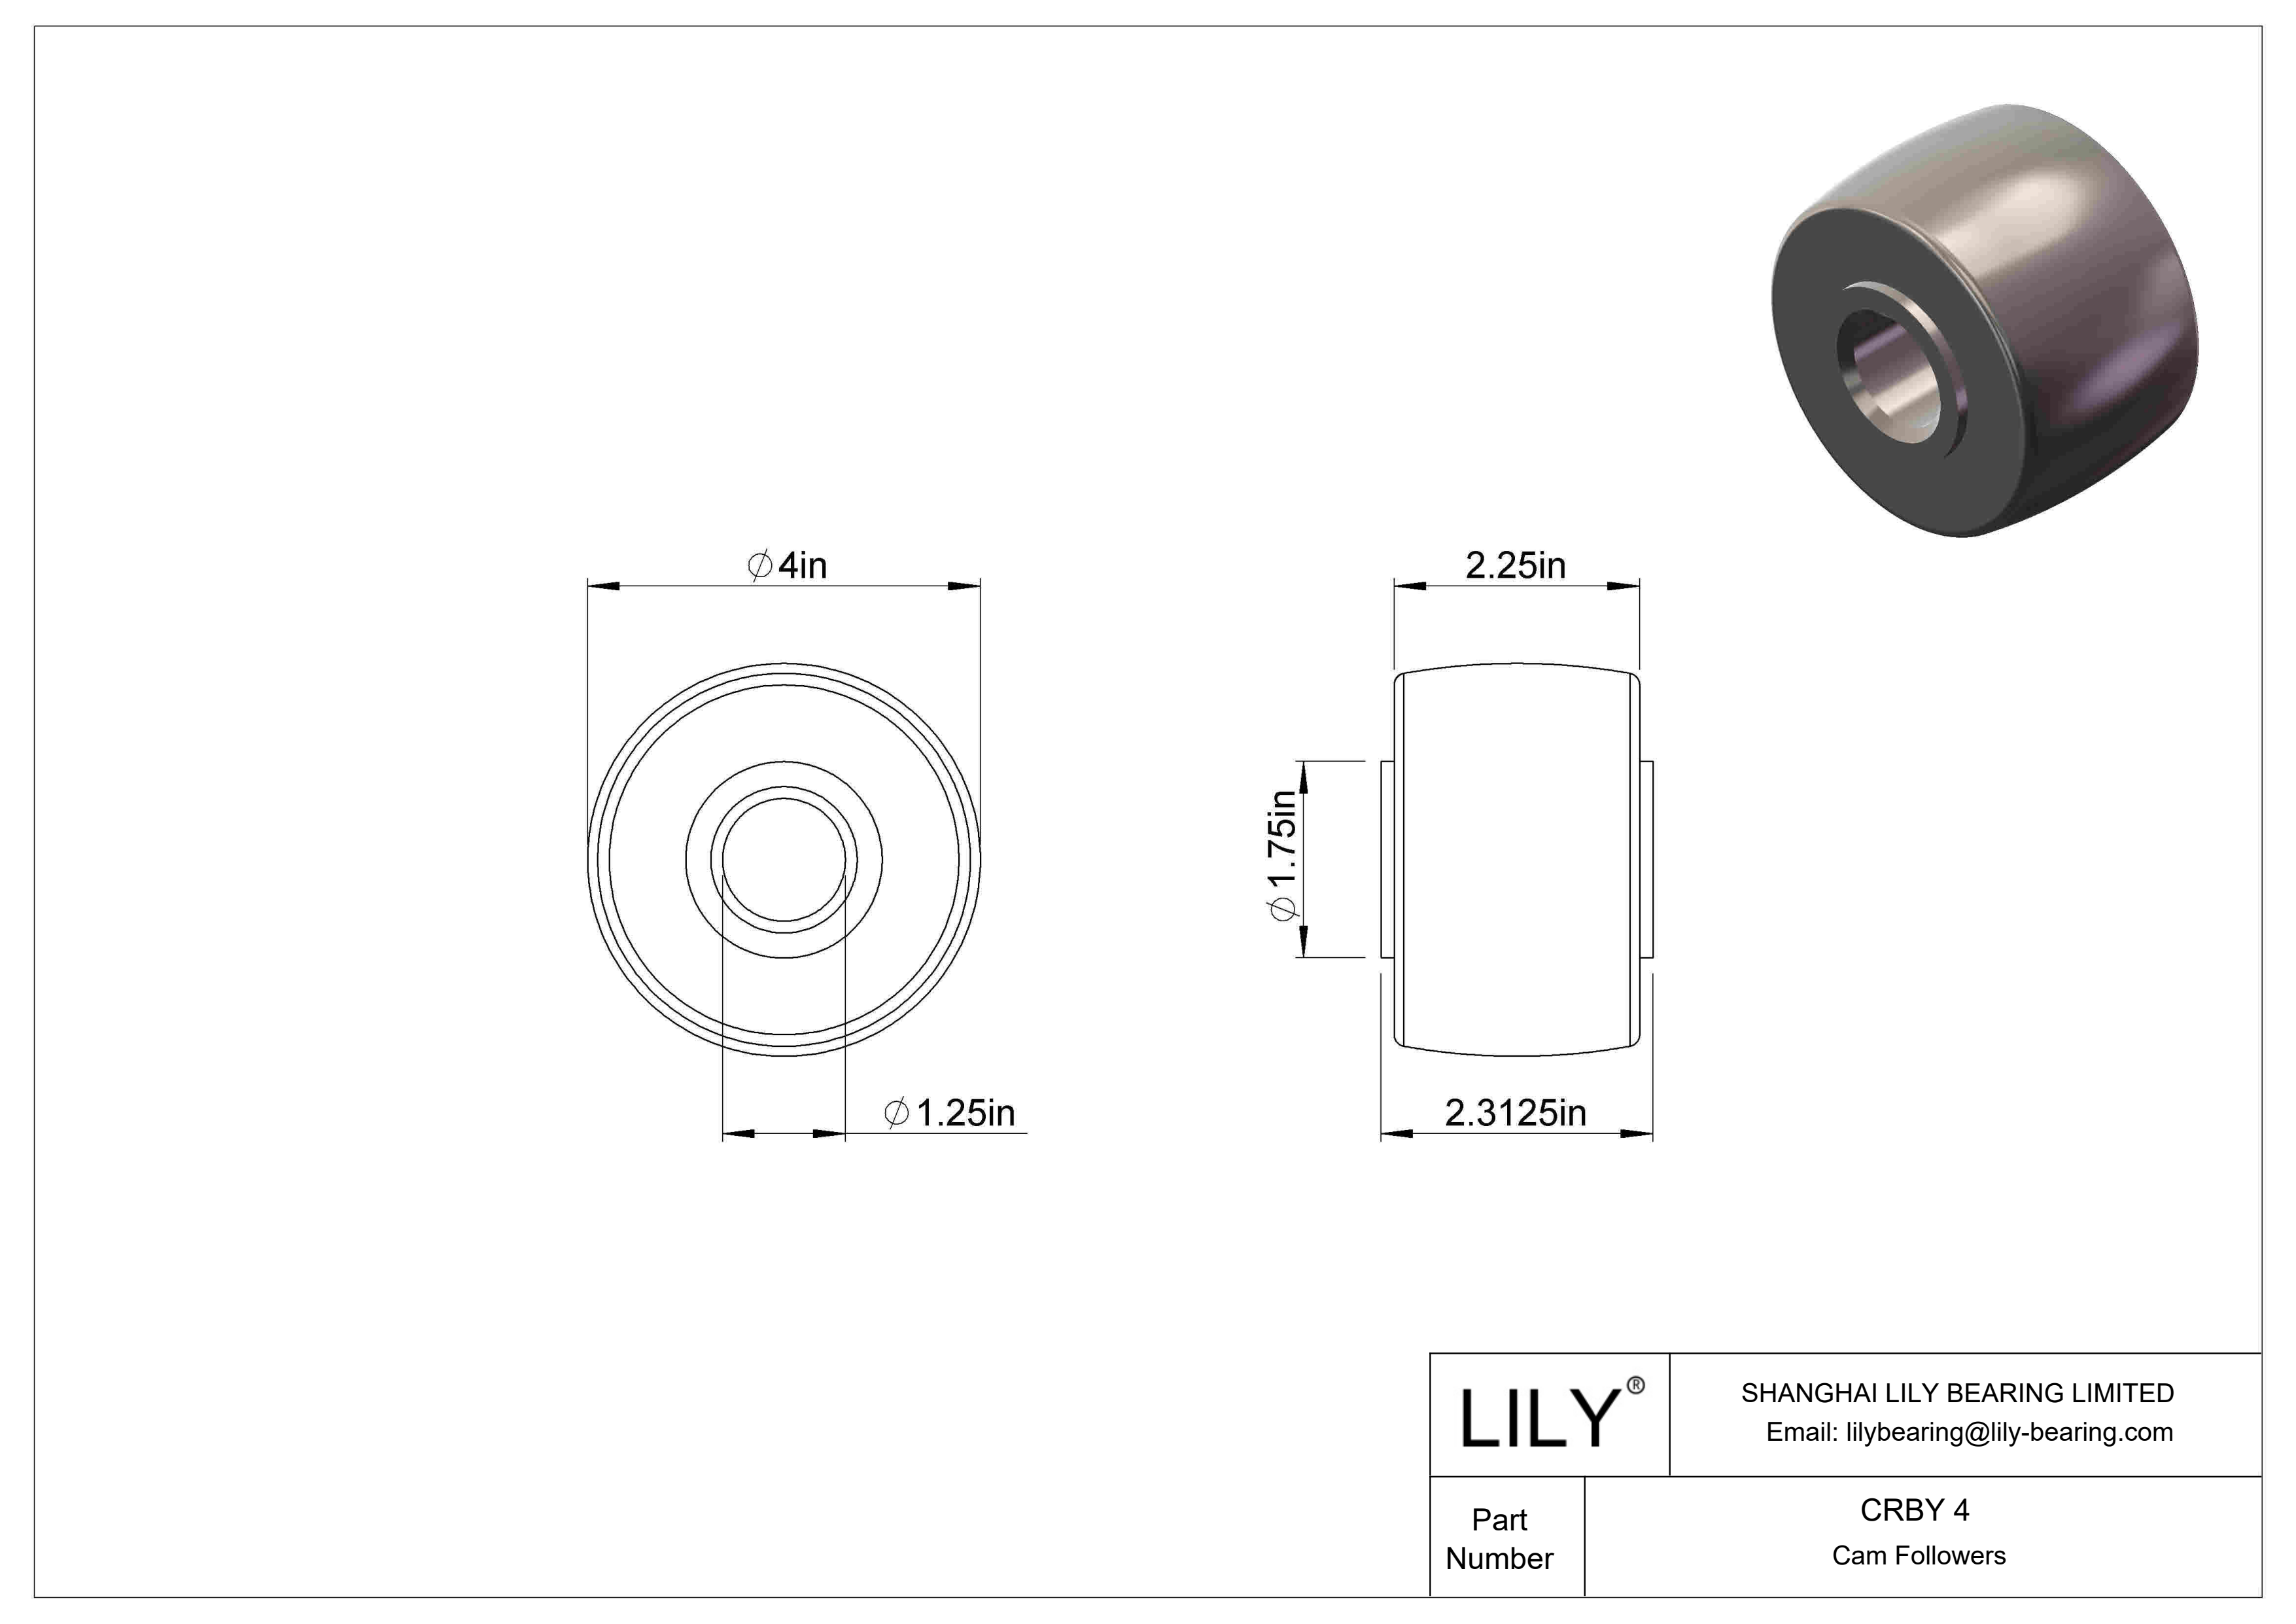 CRBY 4 Roller Cam Follower-Yoke Type cad drawing